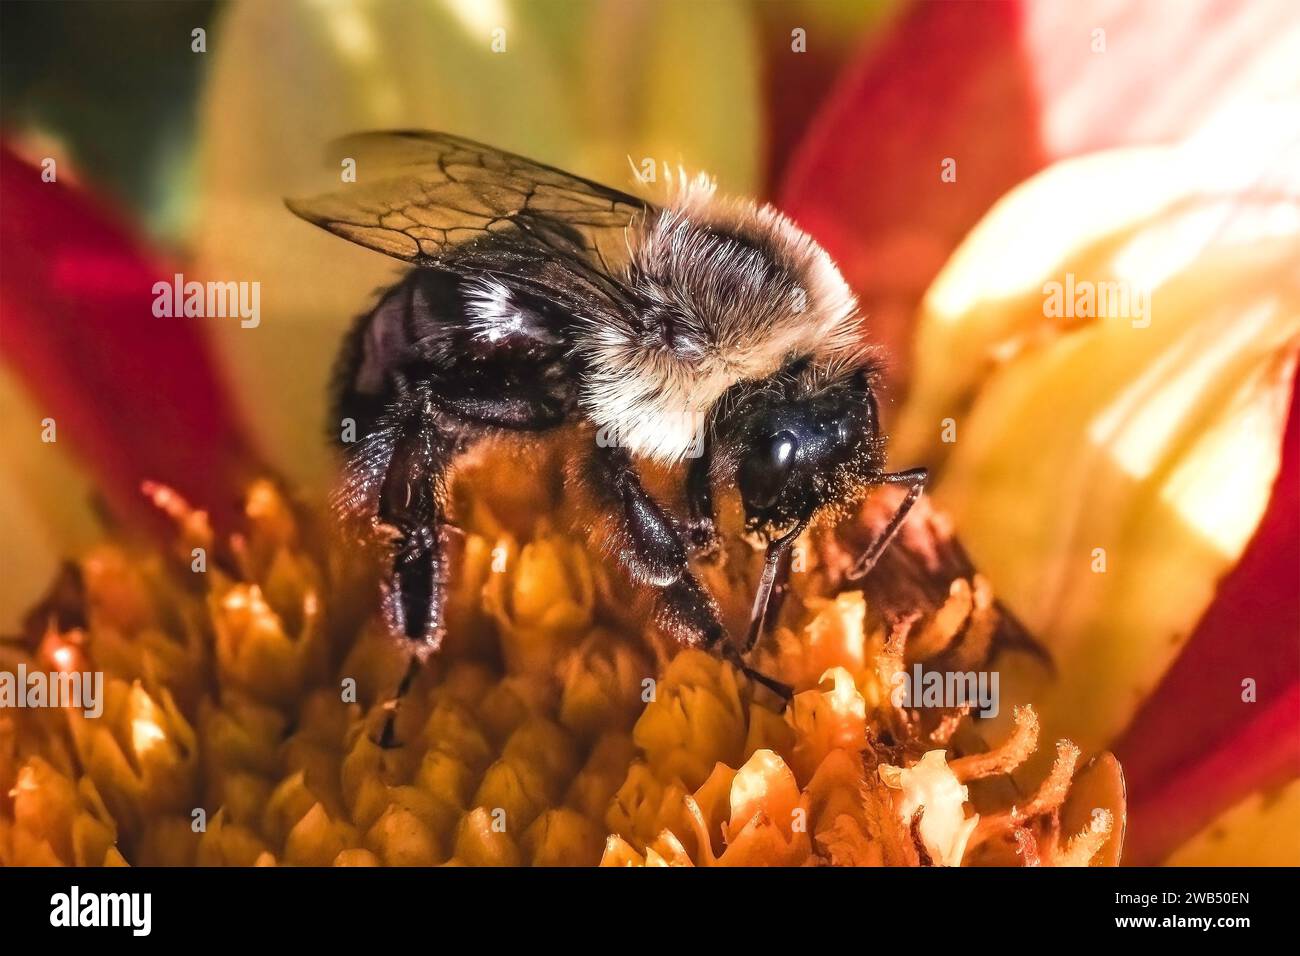 A female Bombus Impatiens Common Eastern Bumble Bee worker pollinating a red and yellow dahlia flower in dappled sunlight. Long Island, New York, USA Stock Photo